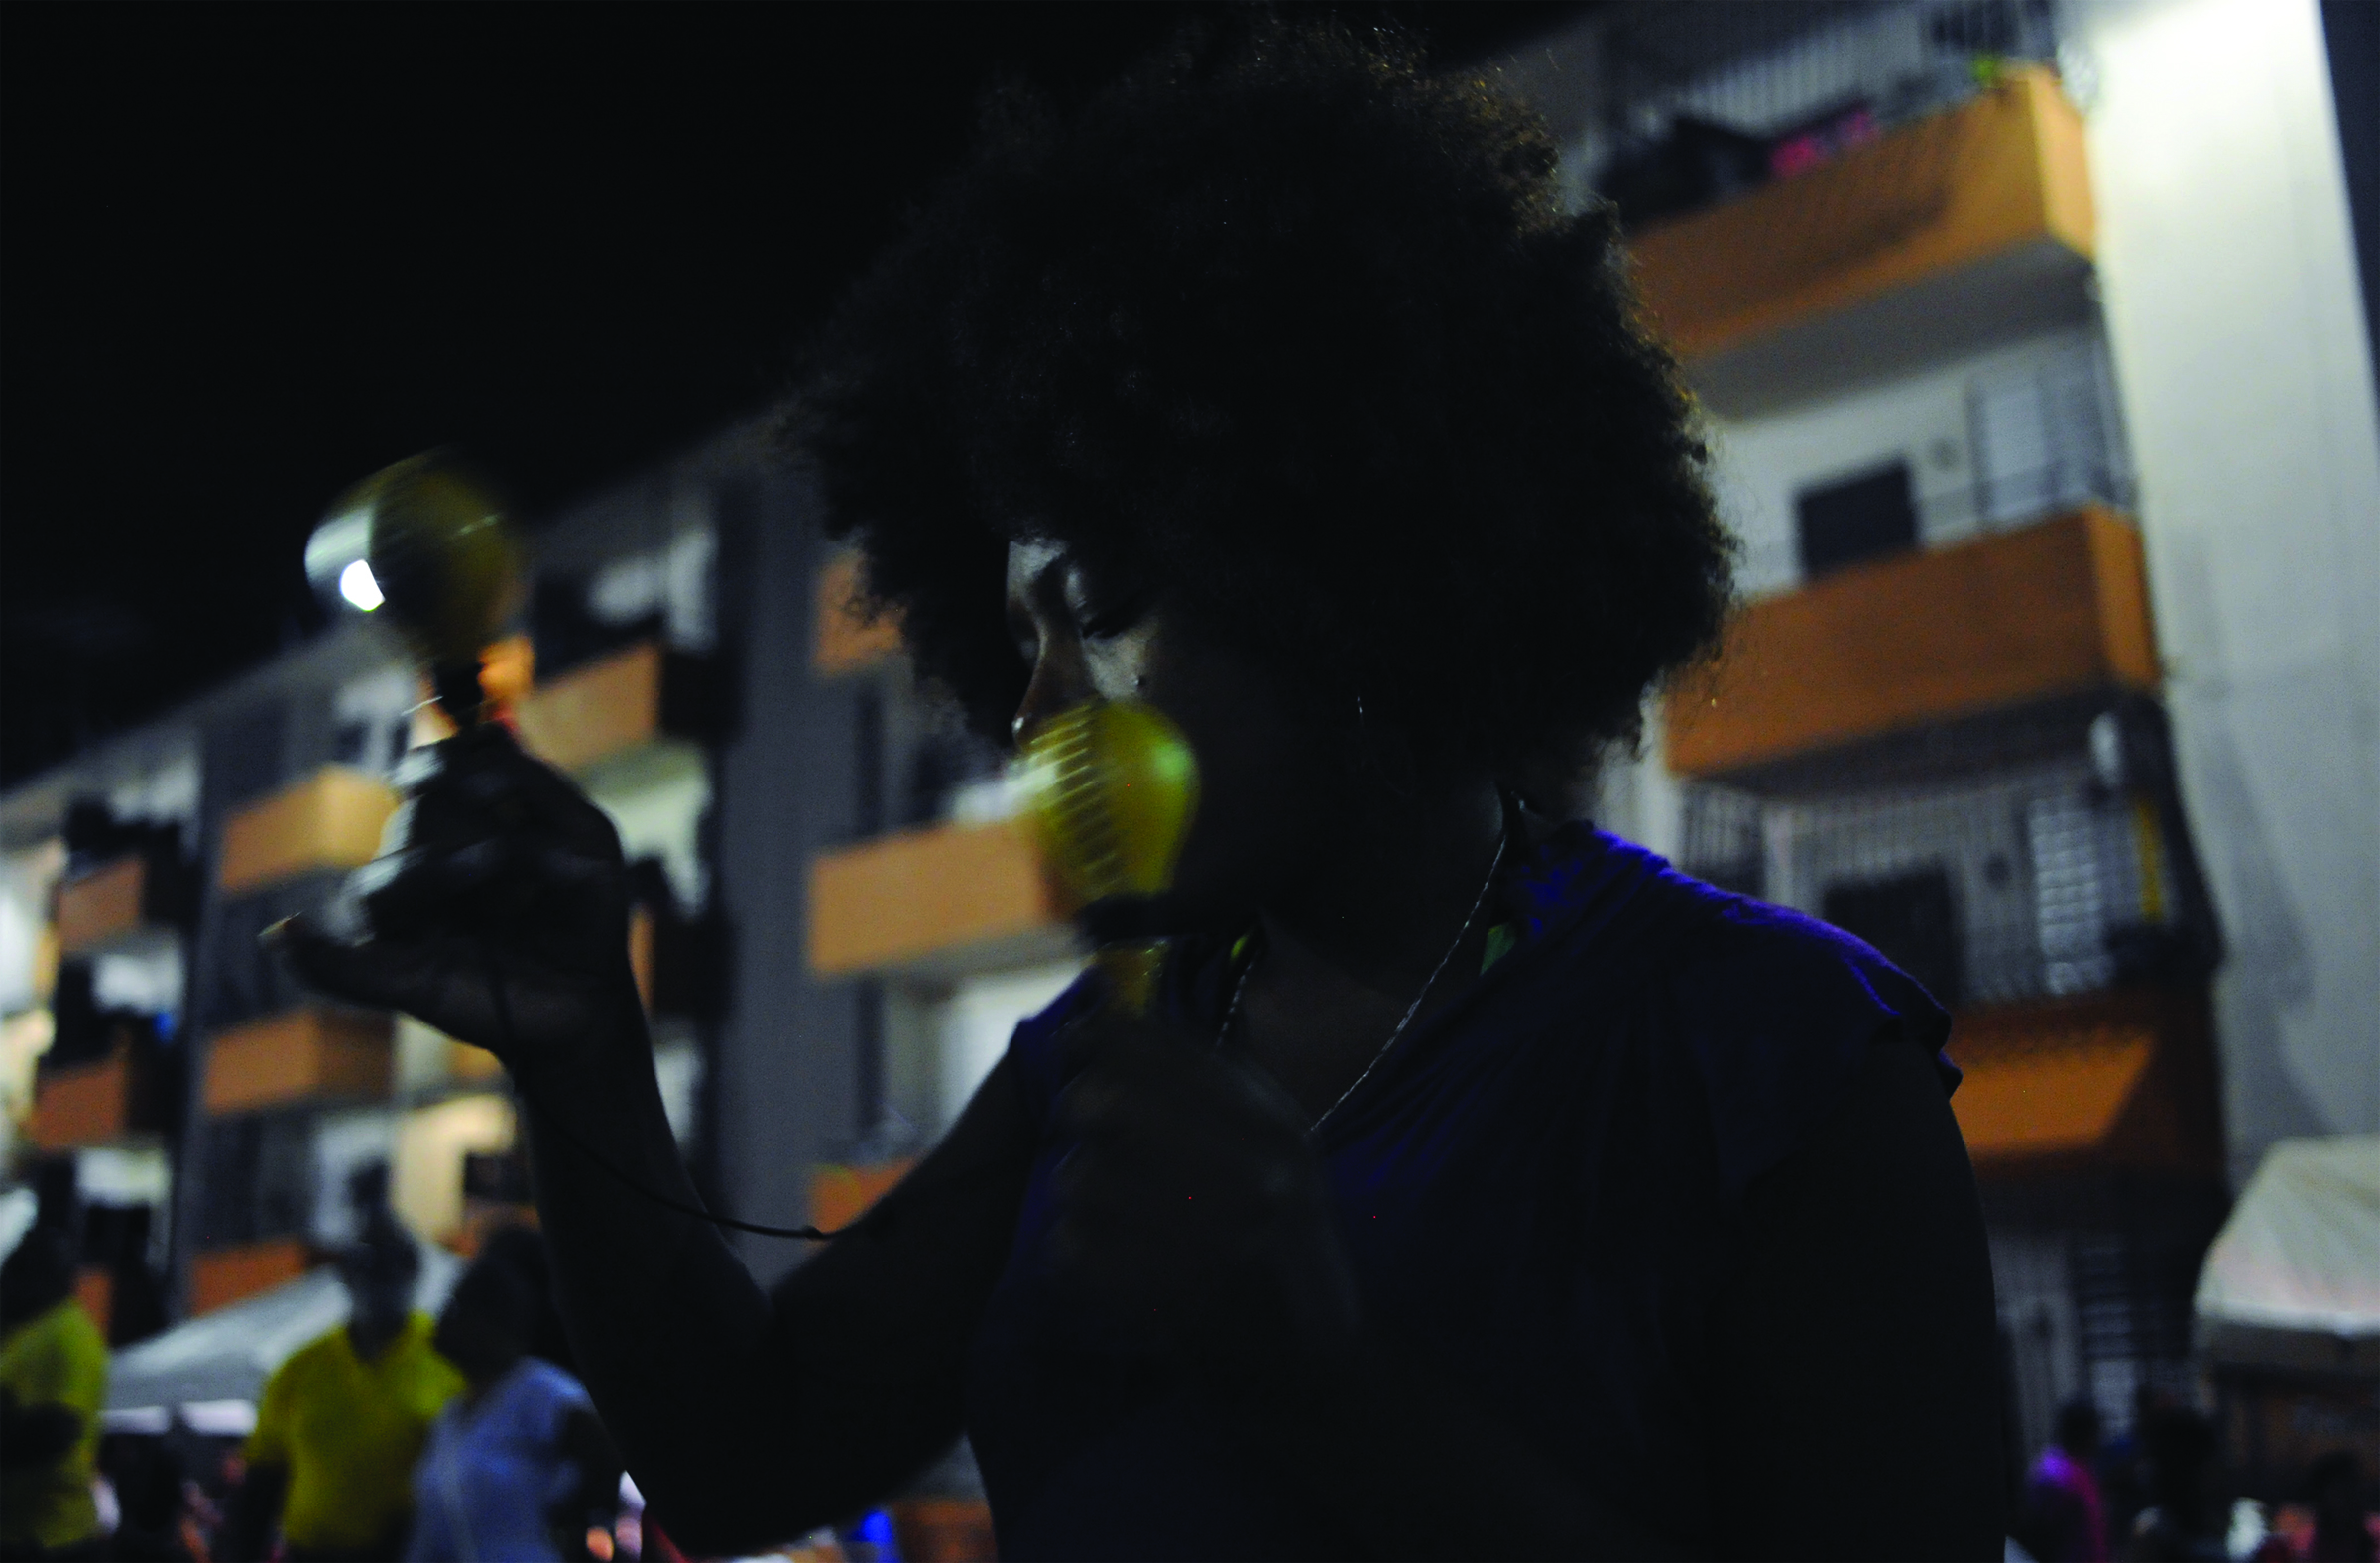 Image shows a dark skinned Puerto Rican woman with natural hair shaking two maracas at night, with an apartment complex in the background